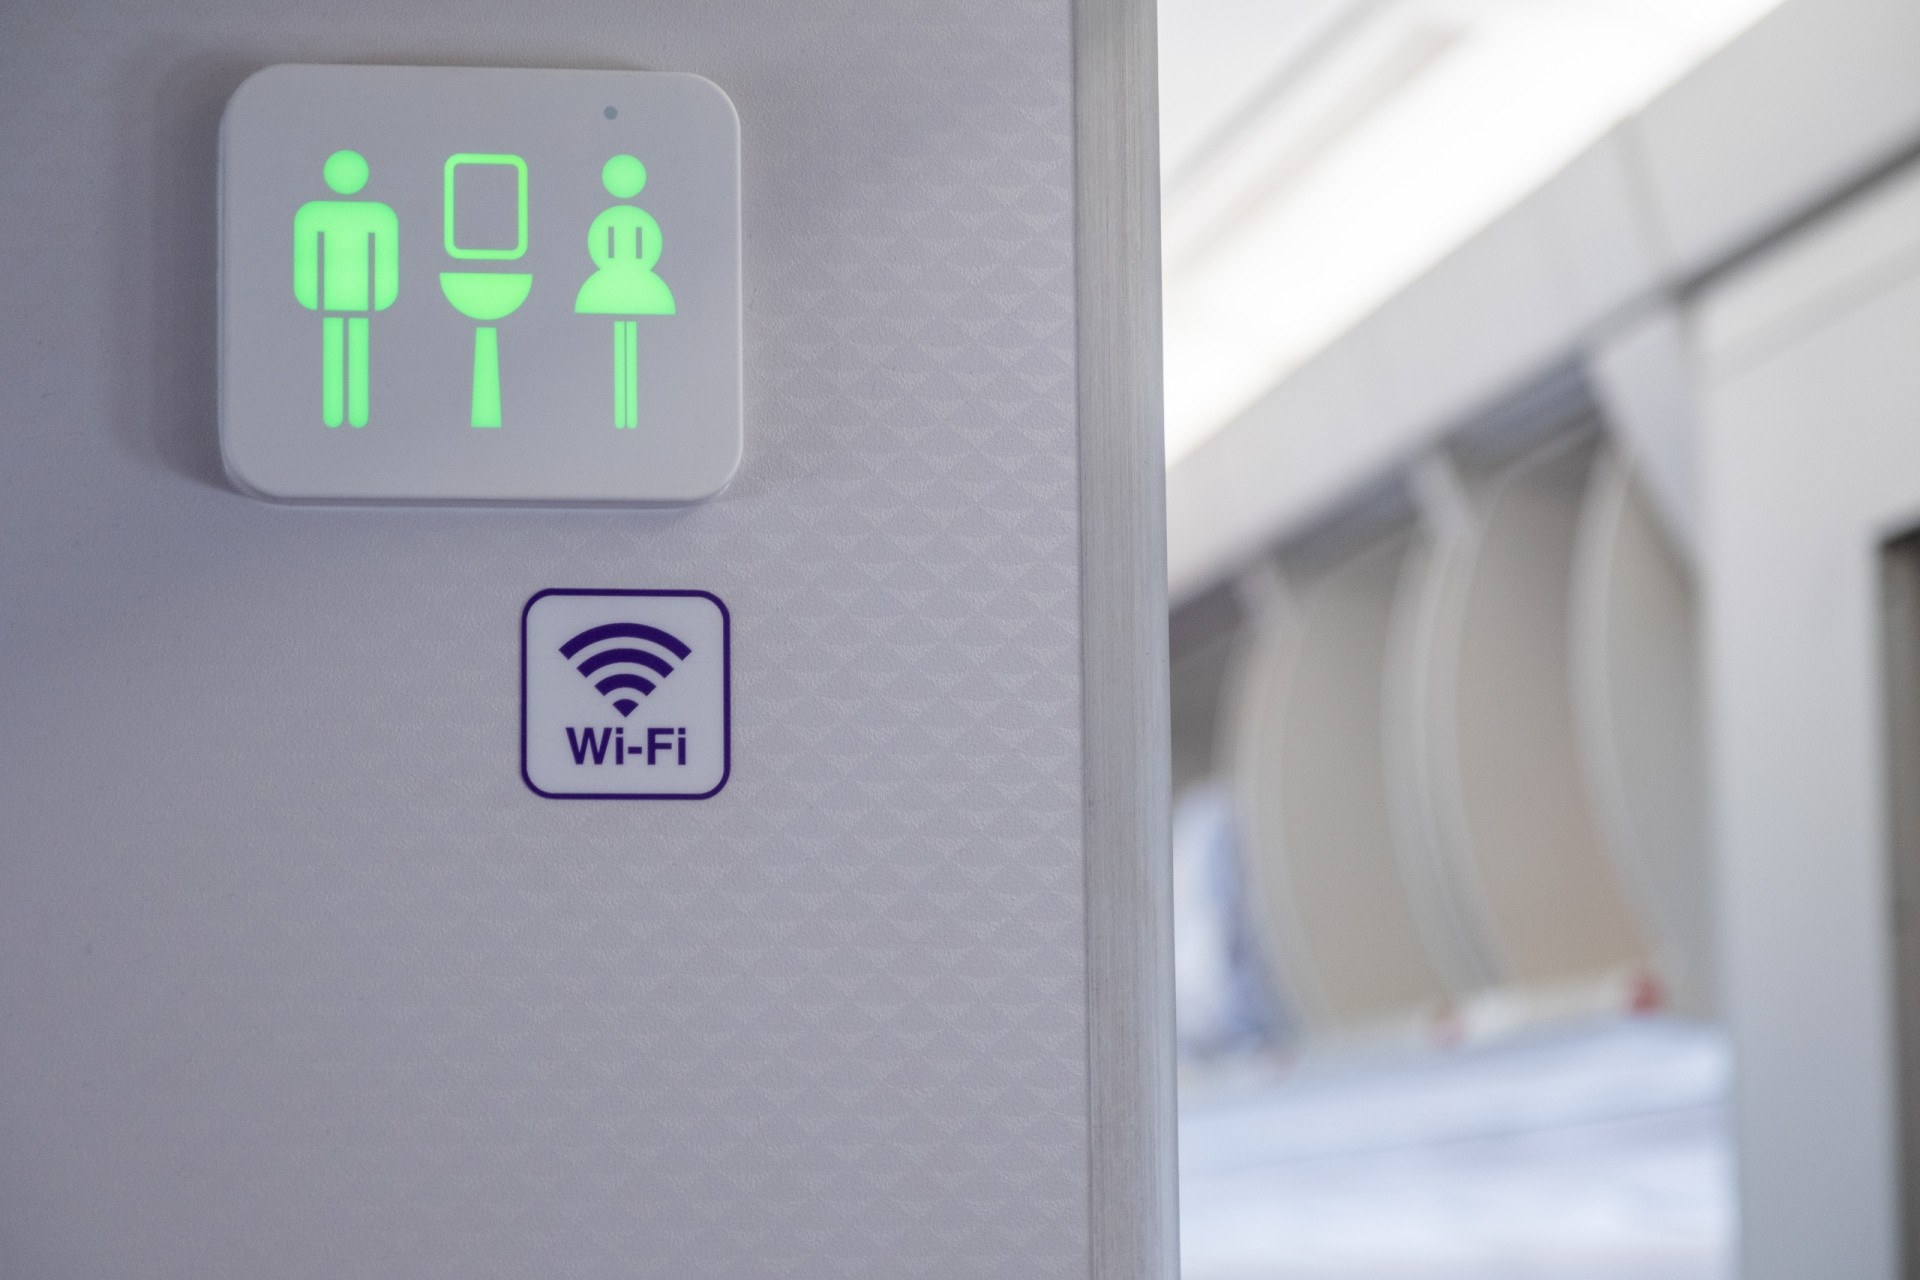 <p>Cabin crew often call the bathroom the blue room, which is a reference to the blue liquid used in aircraft toilets.</p><p><a href="https://www.msn.com/en-us/community/channel/vid-7xx8mnucu55yw63we9va2gwr7uihbxwc68fxqp25x6tg4ftibpra?cvid=94631541bc0f4f89bfd59158d696ad7e">Follow us and access great exclusive content every day</a></p>